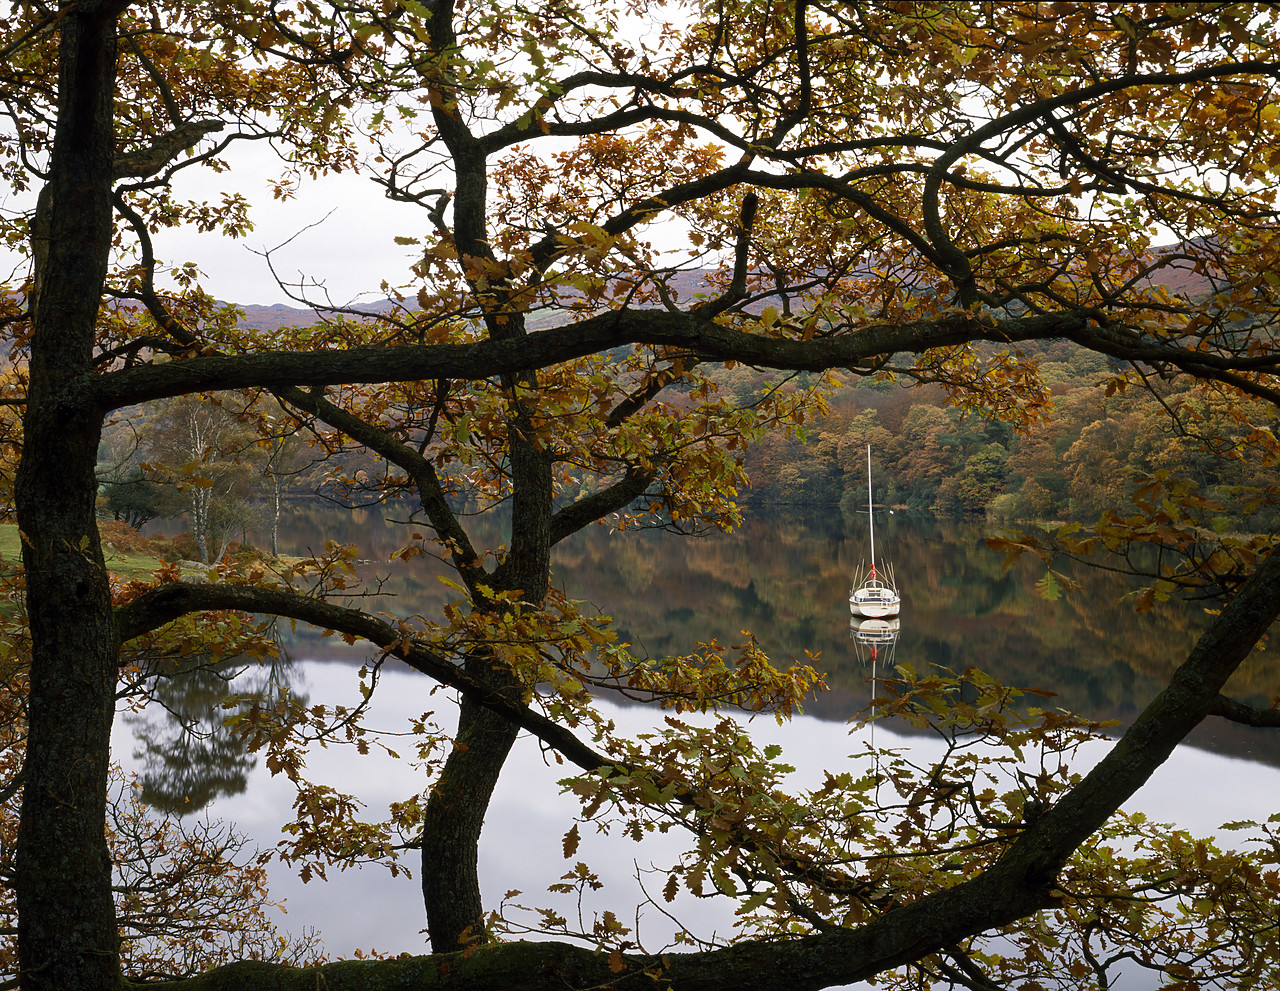 #924153 - Sailboat Framed by Tree, Lake Coniston, Lake District National Park, Cumbria, England